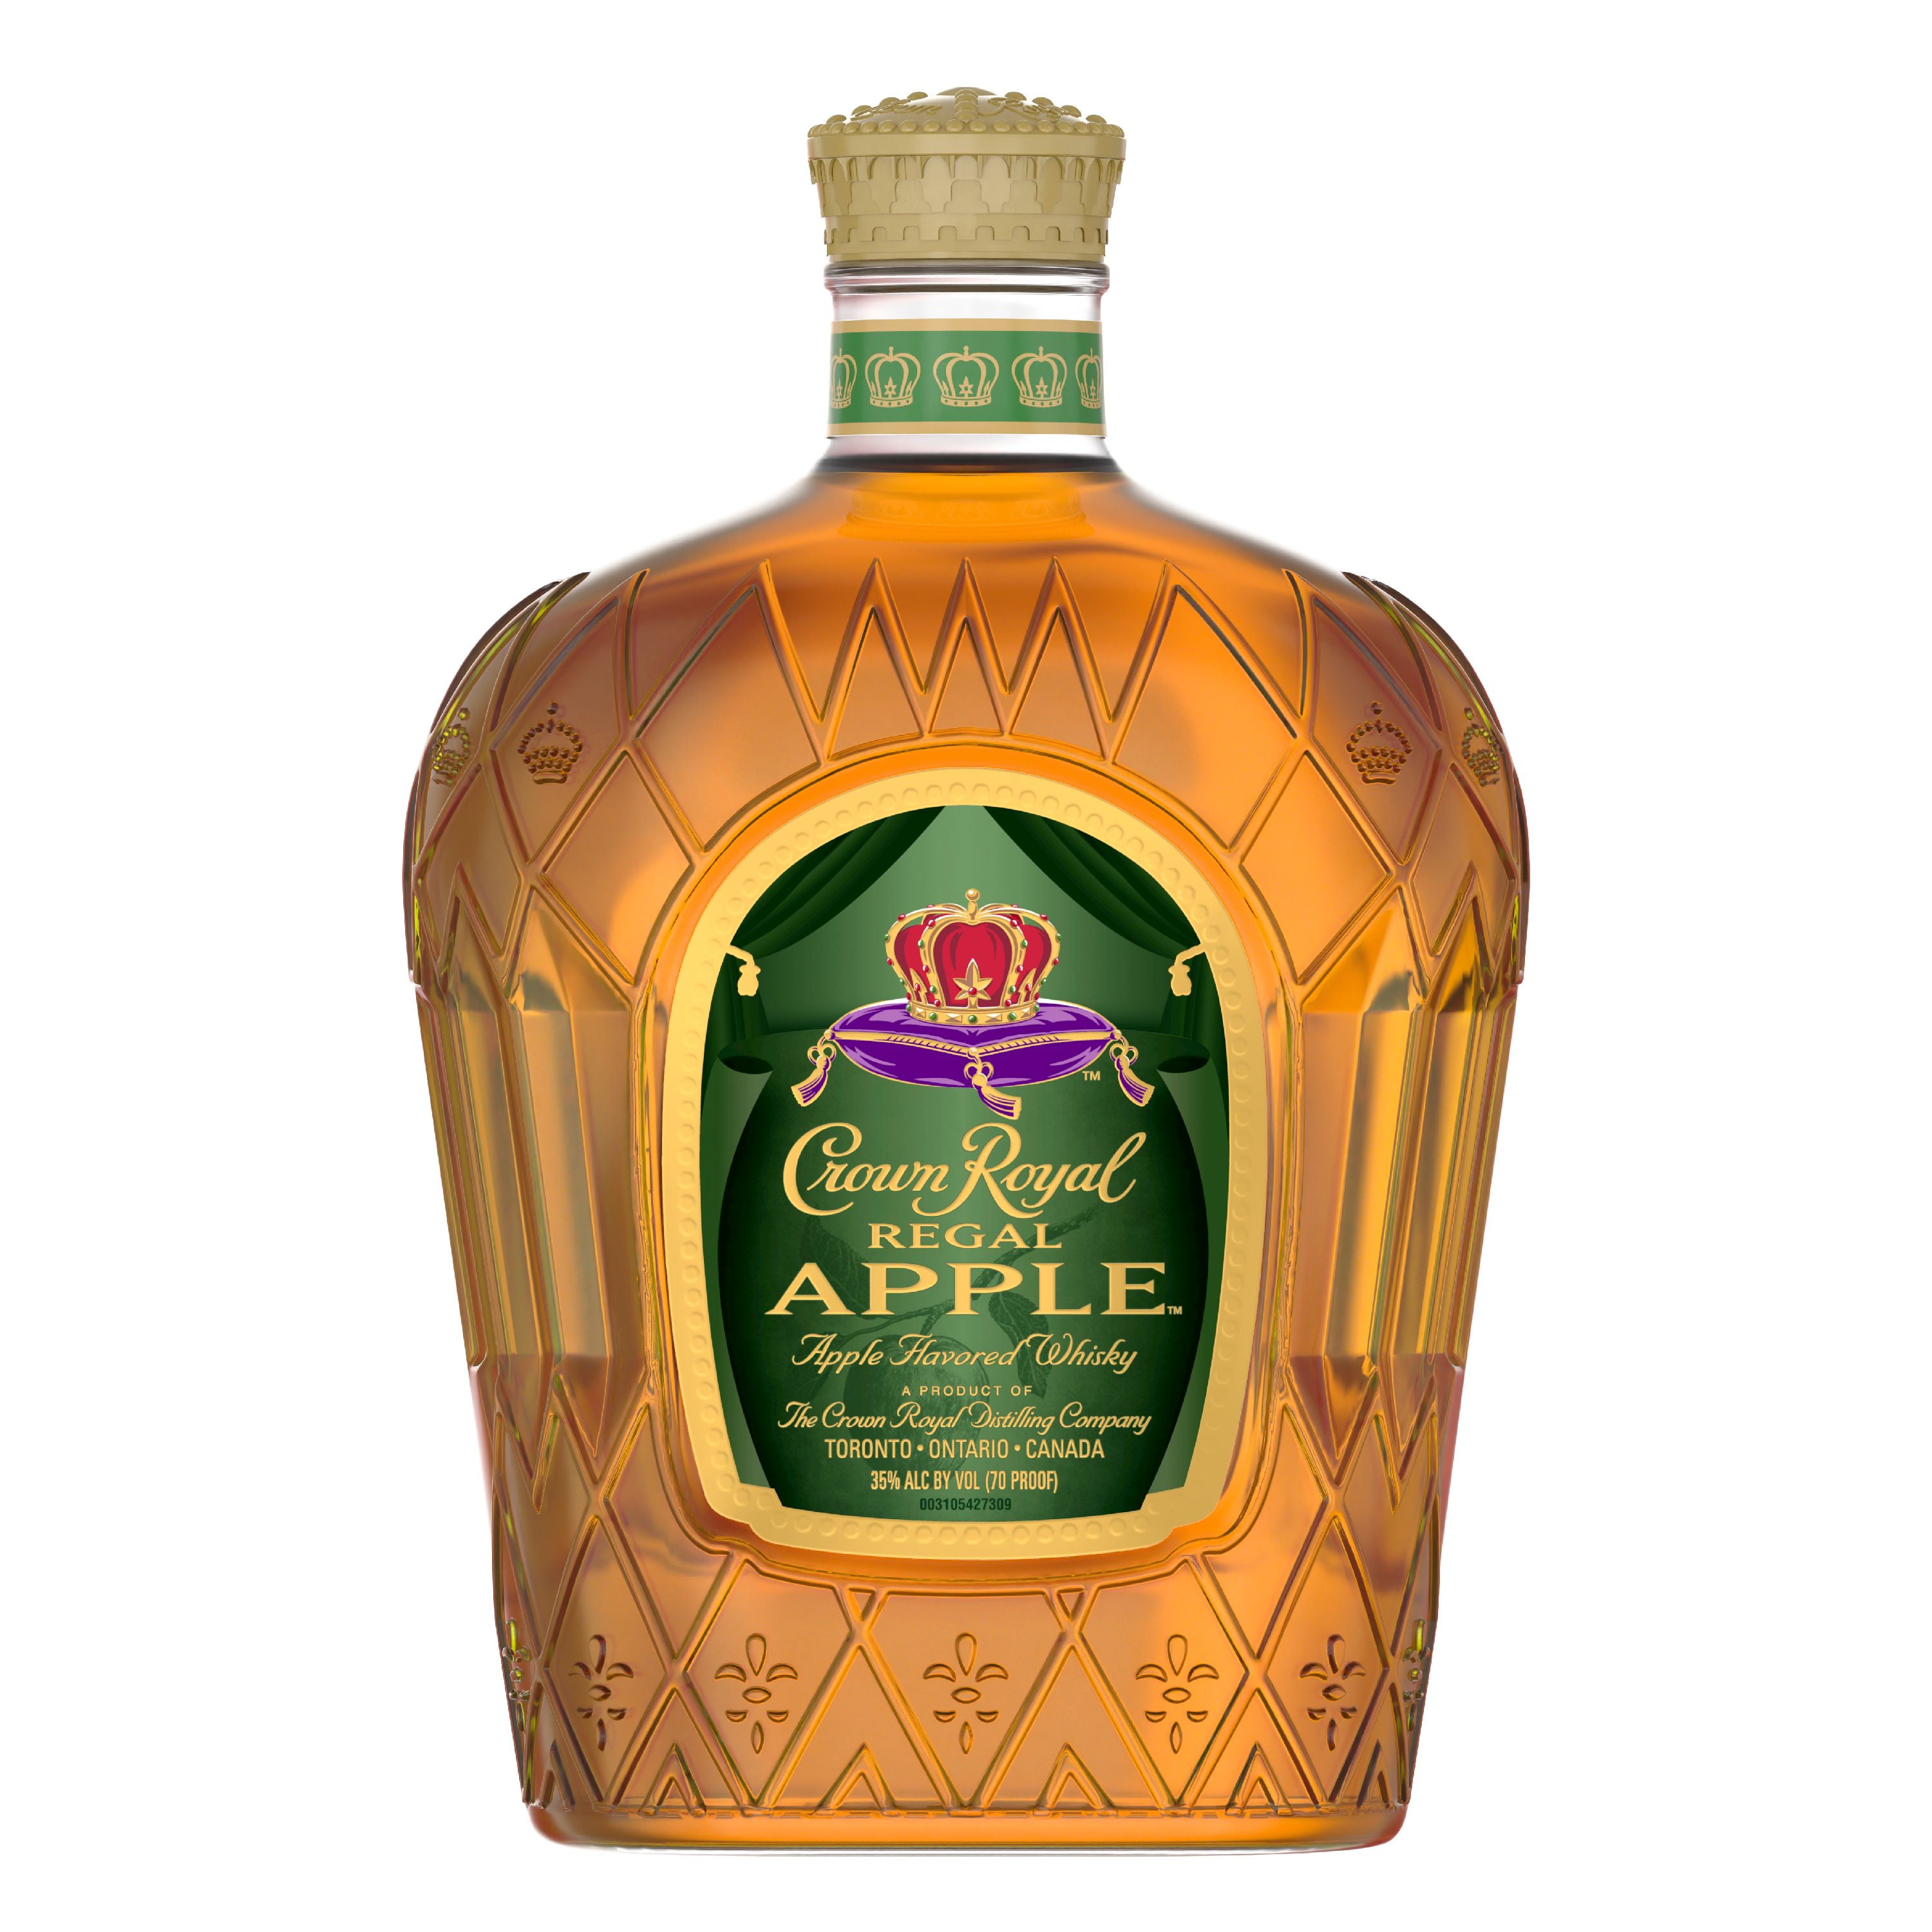 Crown Royal Regal Apple Flavored Whisky, 1 L (70 Proof ...